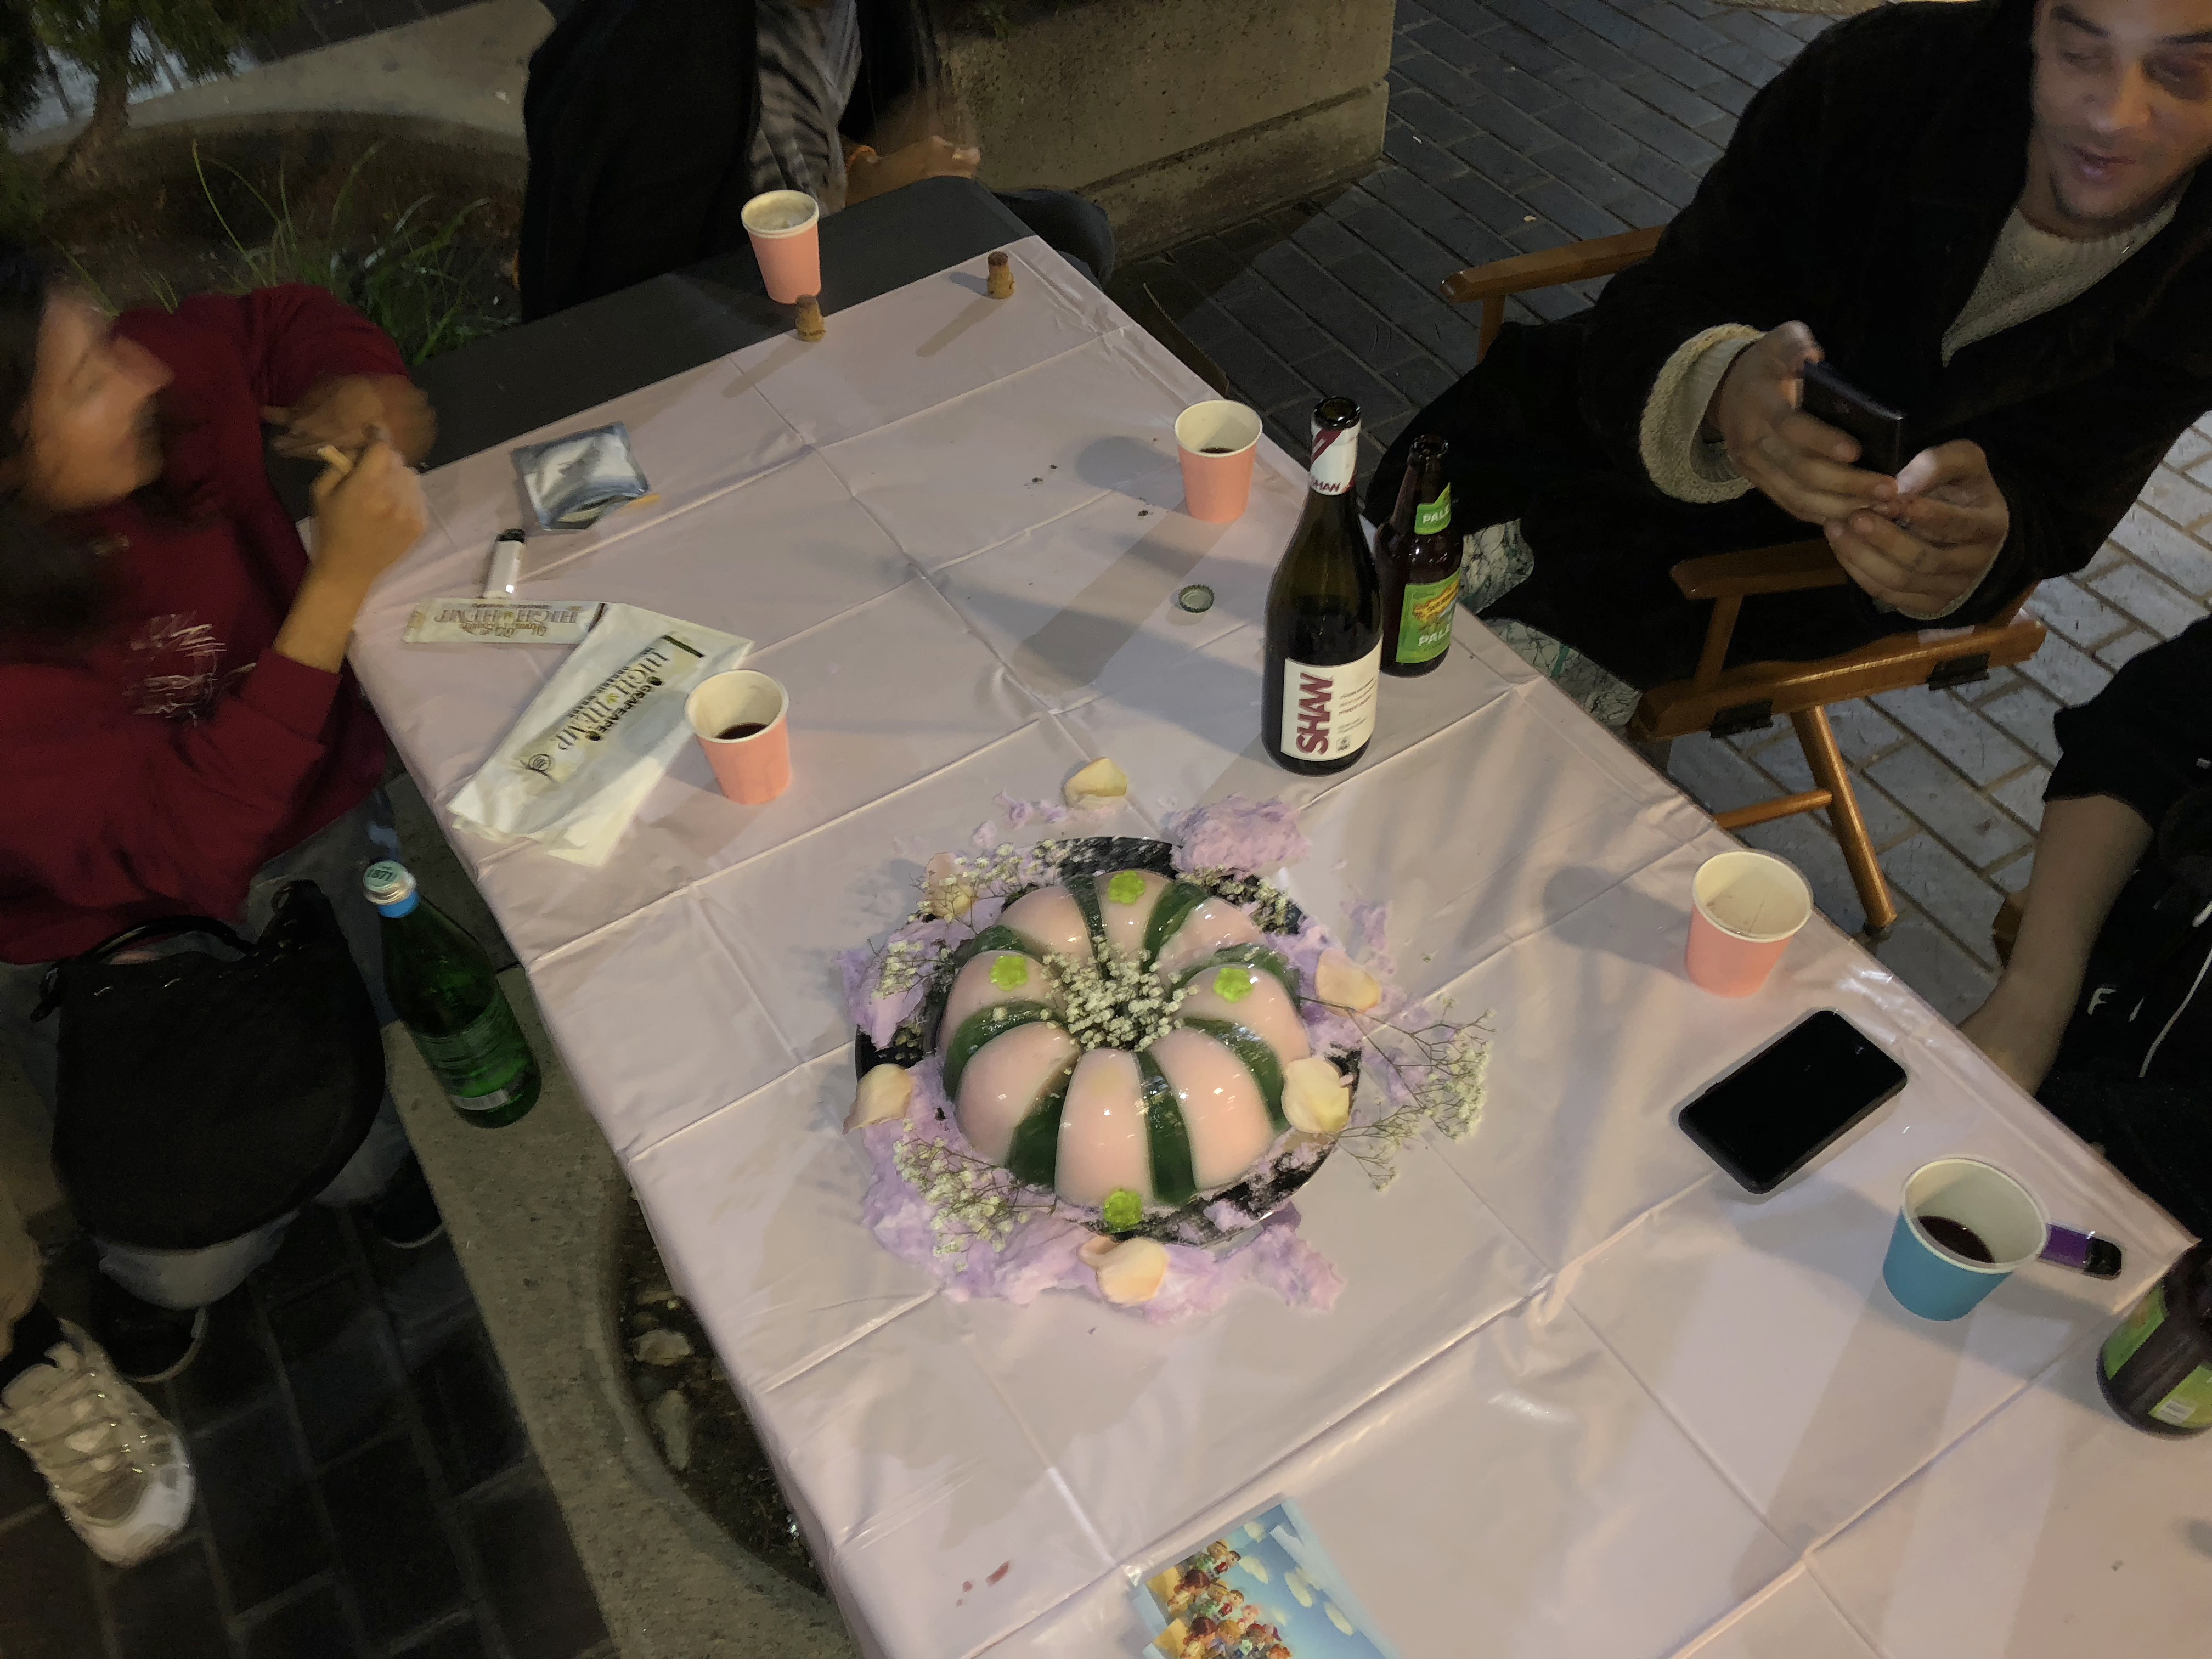 People sitting around a pink table drinking and talking